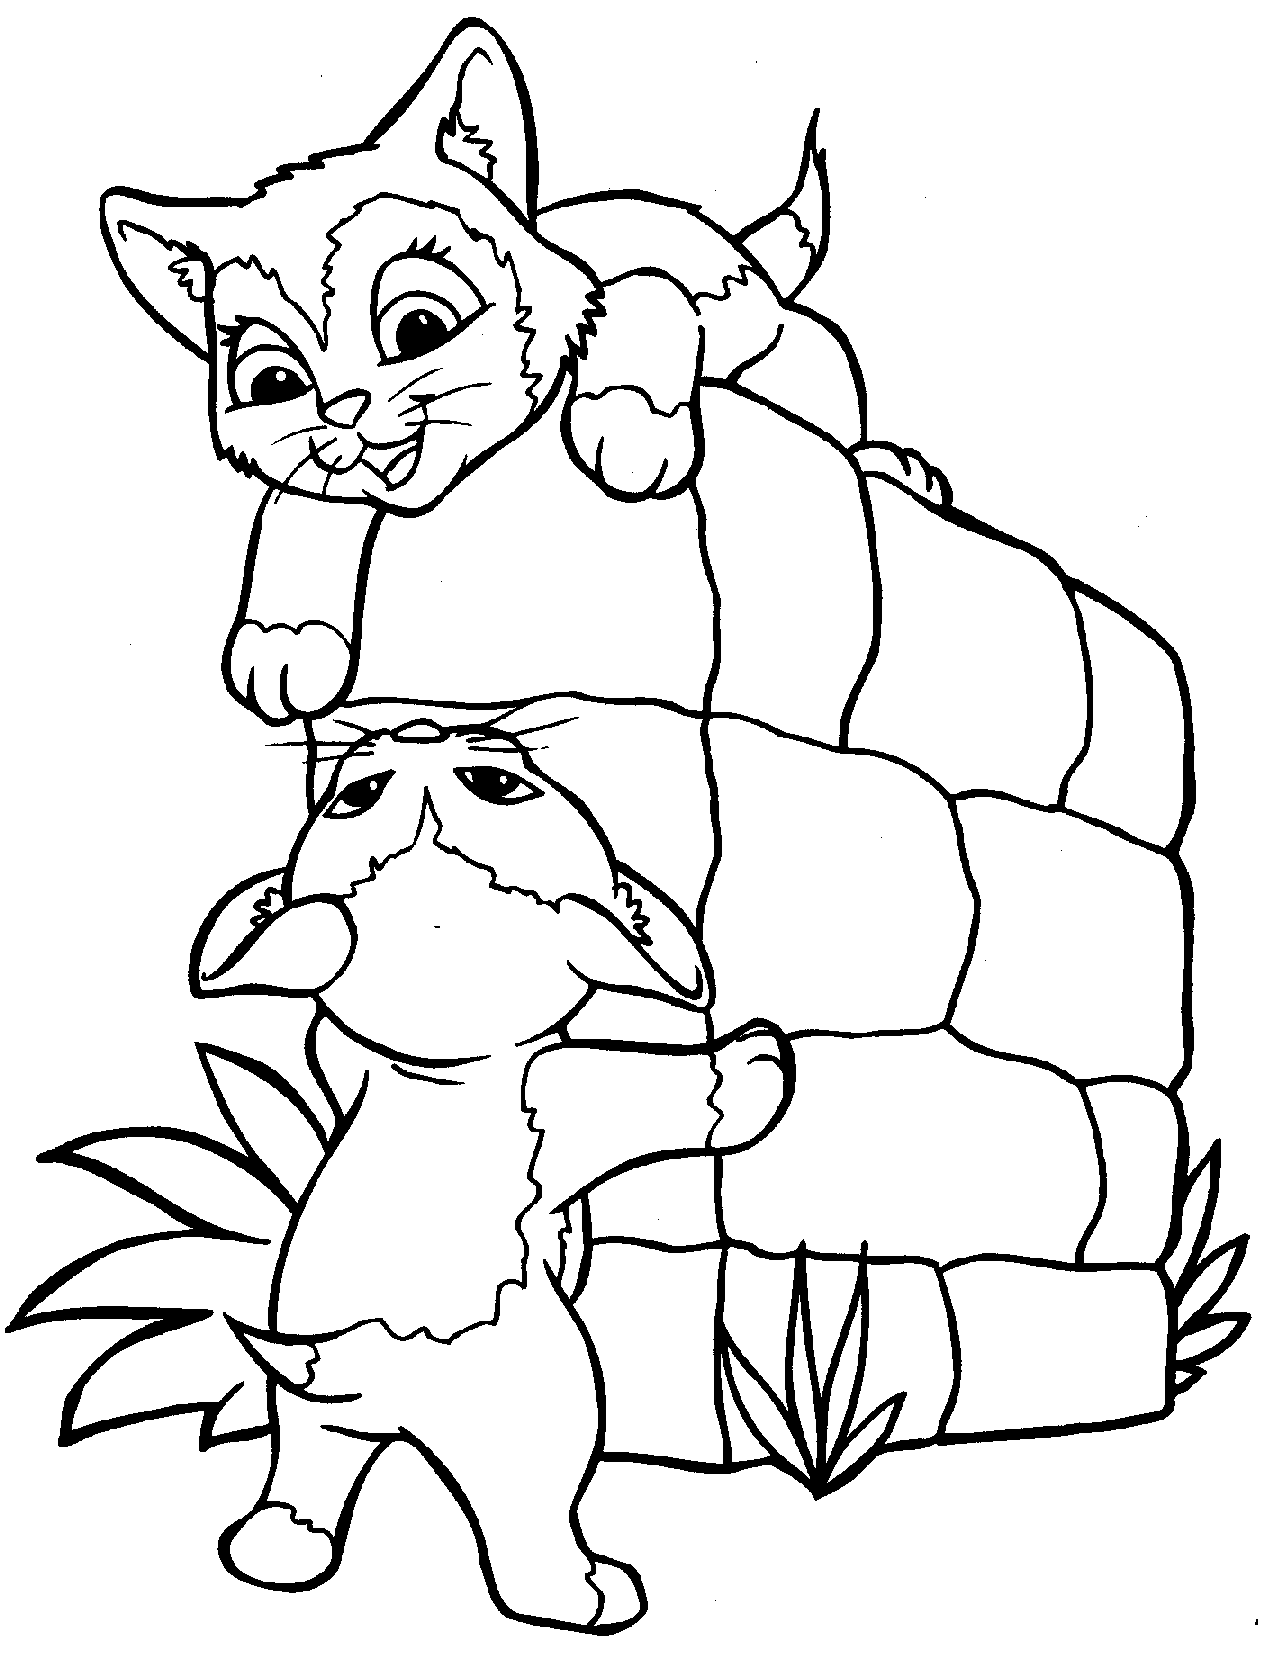 coloring pages of kittens to print free printable cat coloring pages for kids print coloring kittens pages of to 